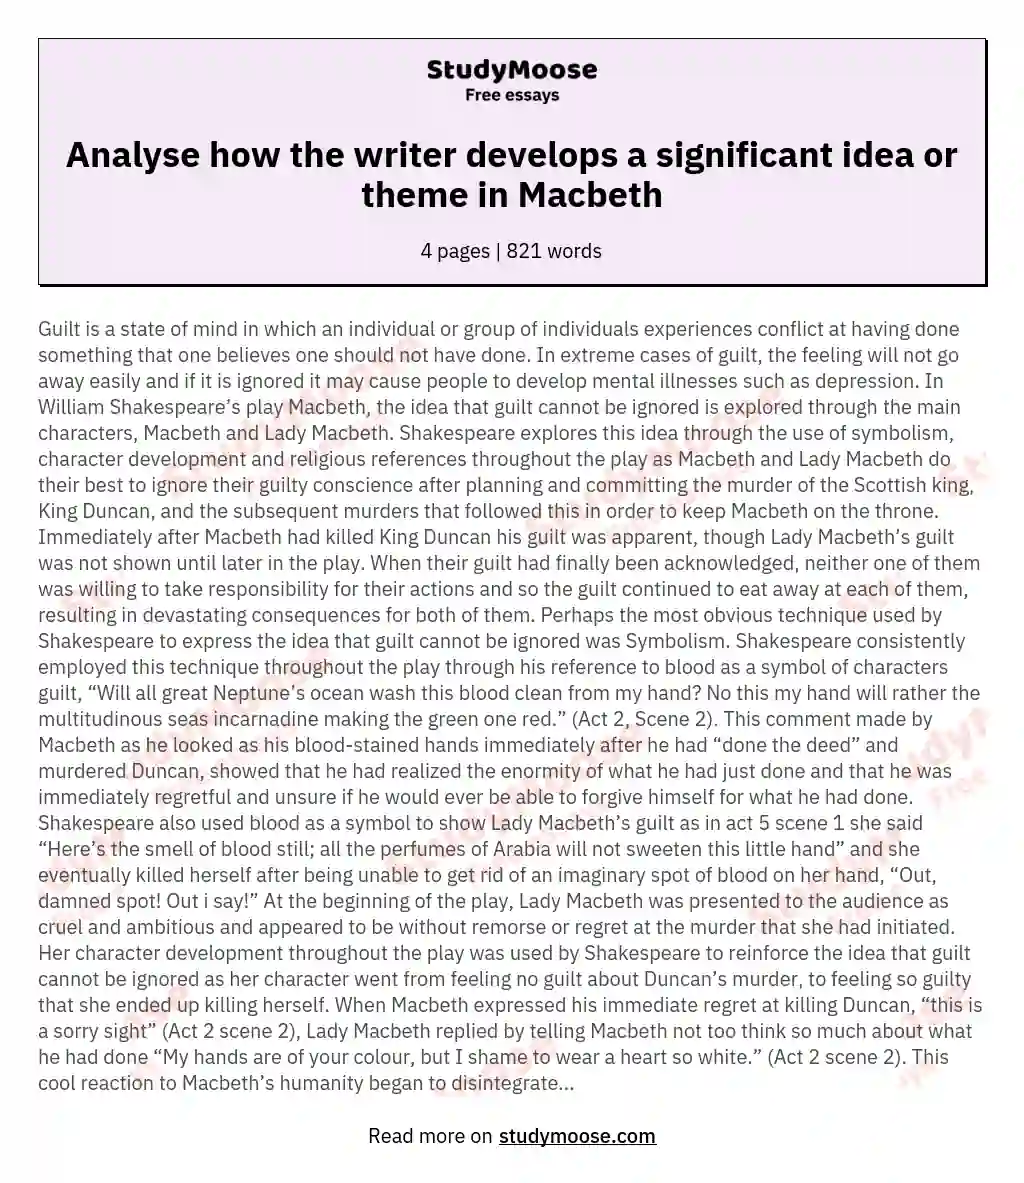 Analyse how the writer develops a significant idea or theme in Macbeth essay